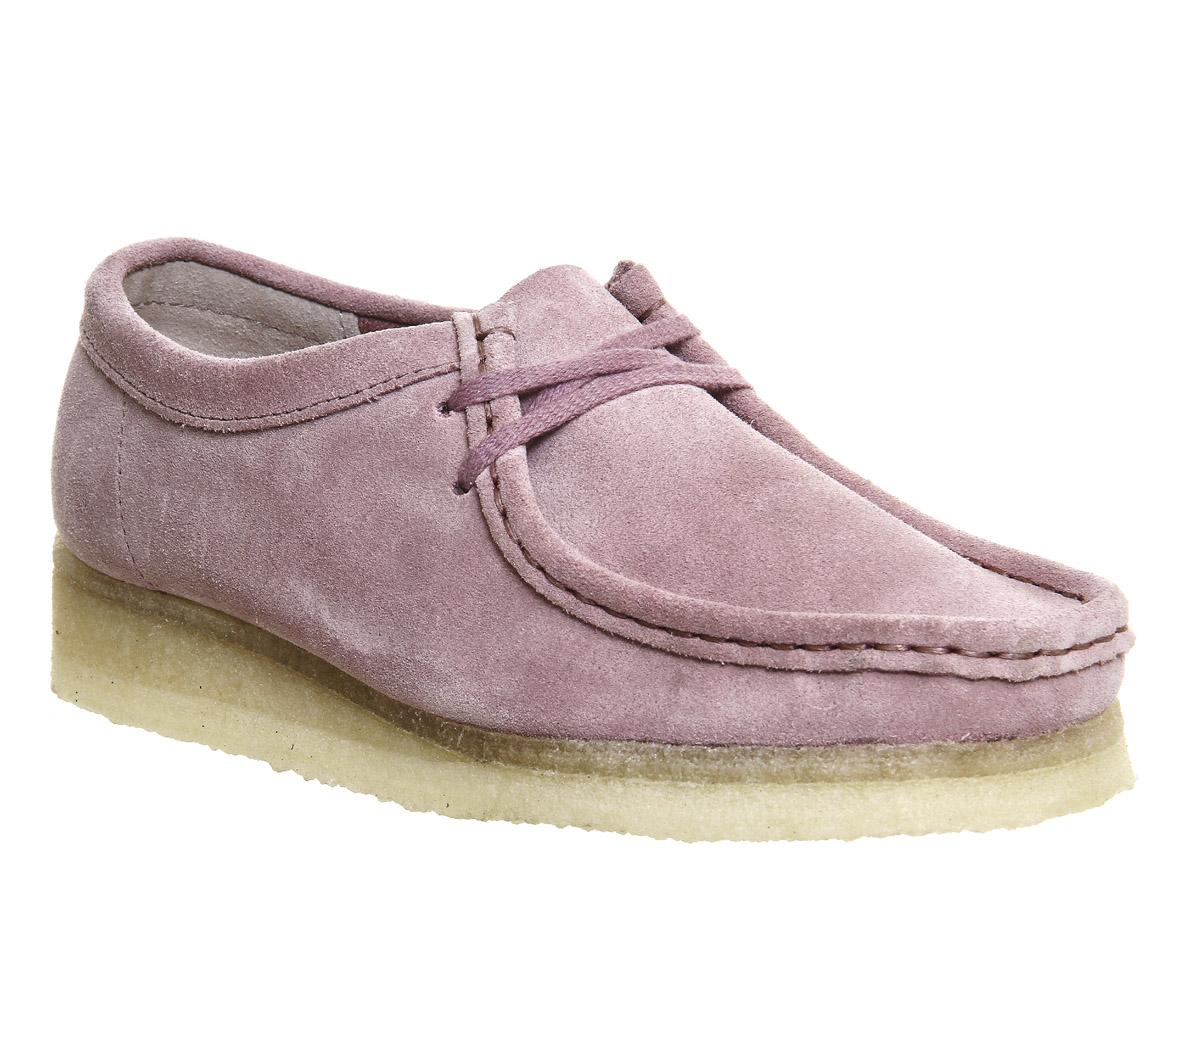 Clarks Wallabee Suede Ankle Boots in Pink | Lyst